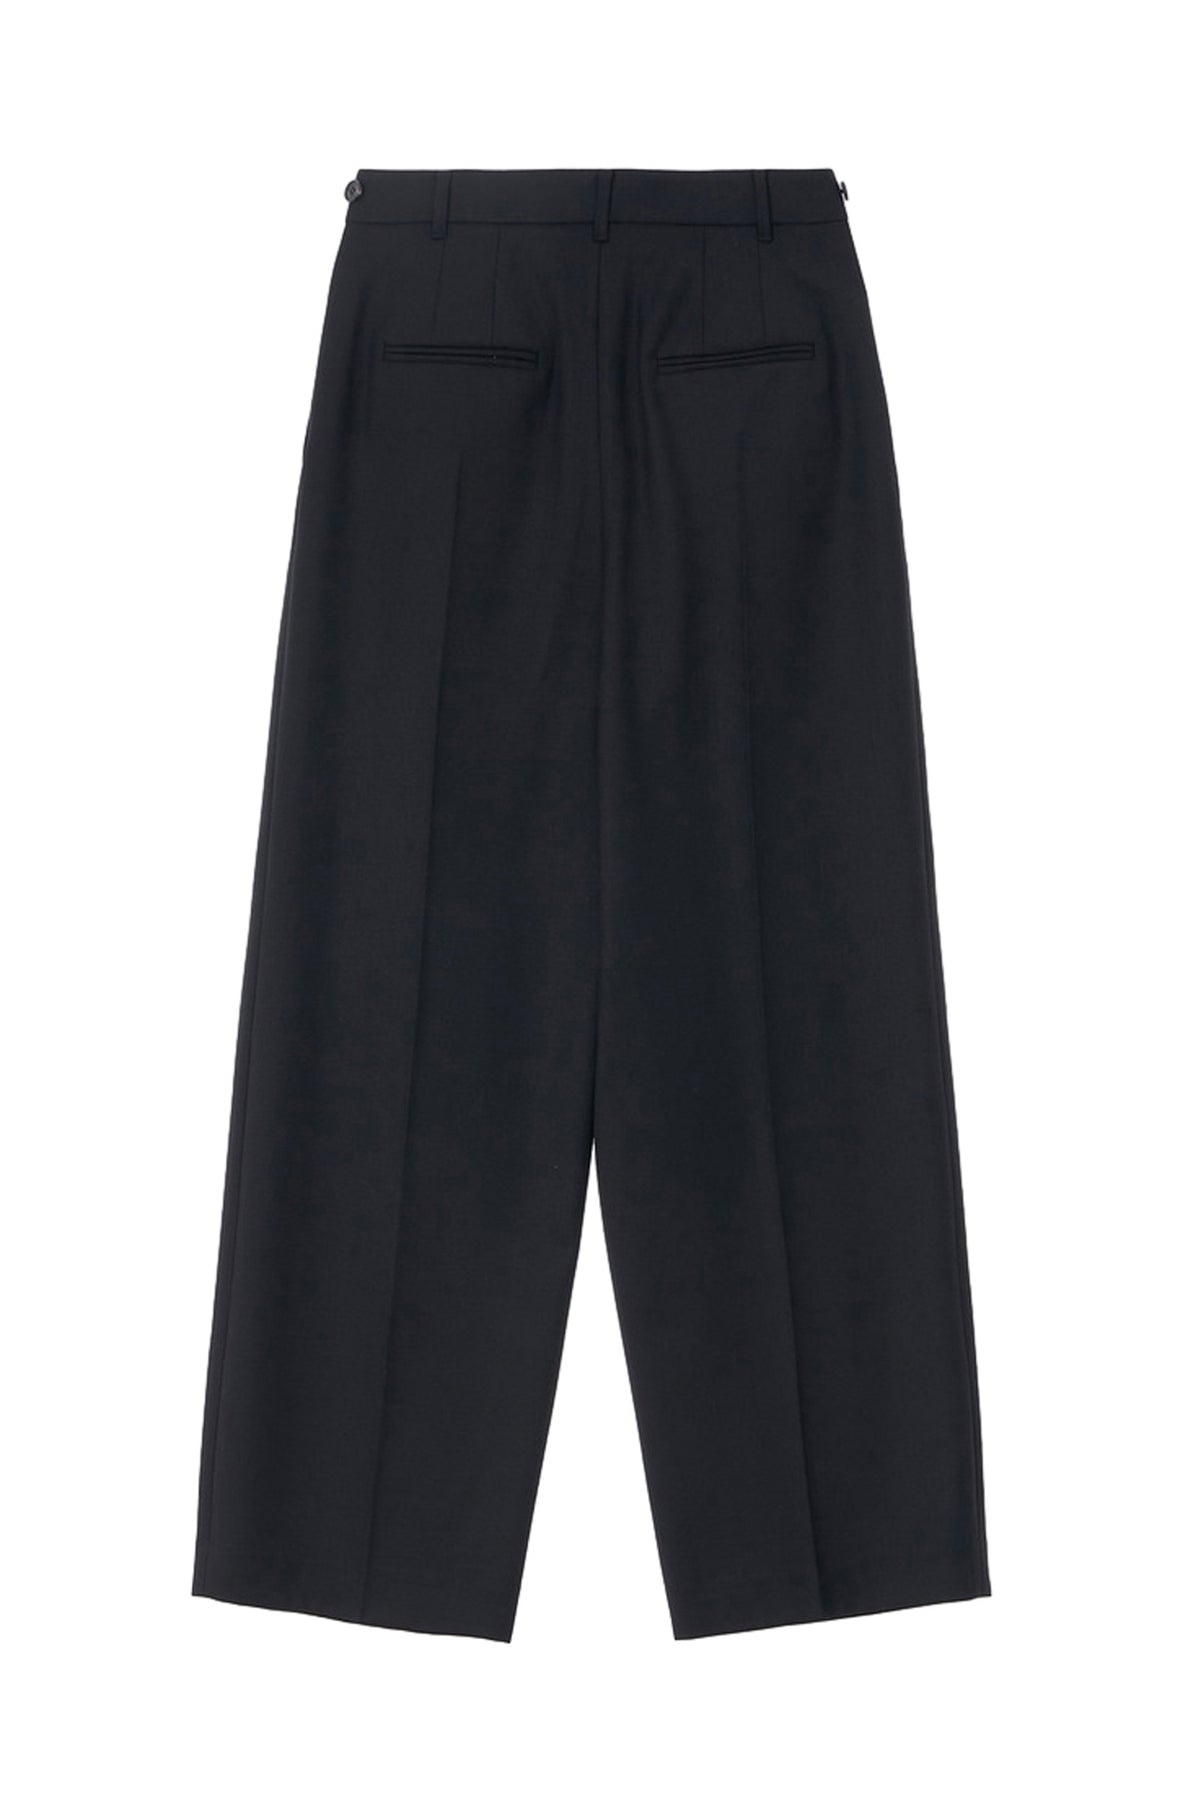 TWO-TUCK PANTS / BLK